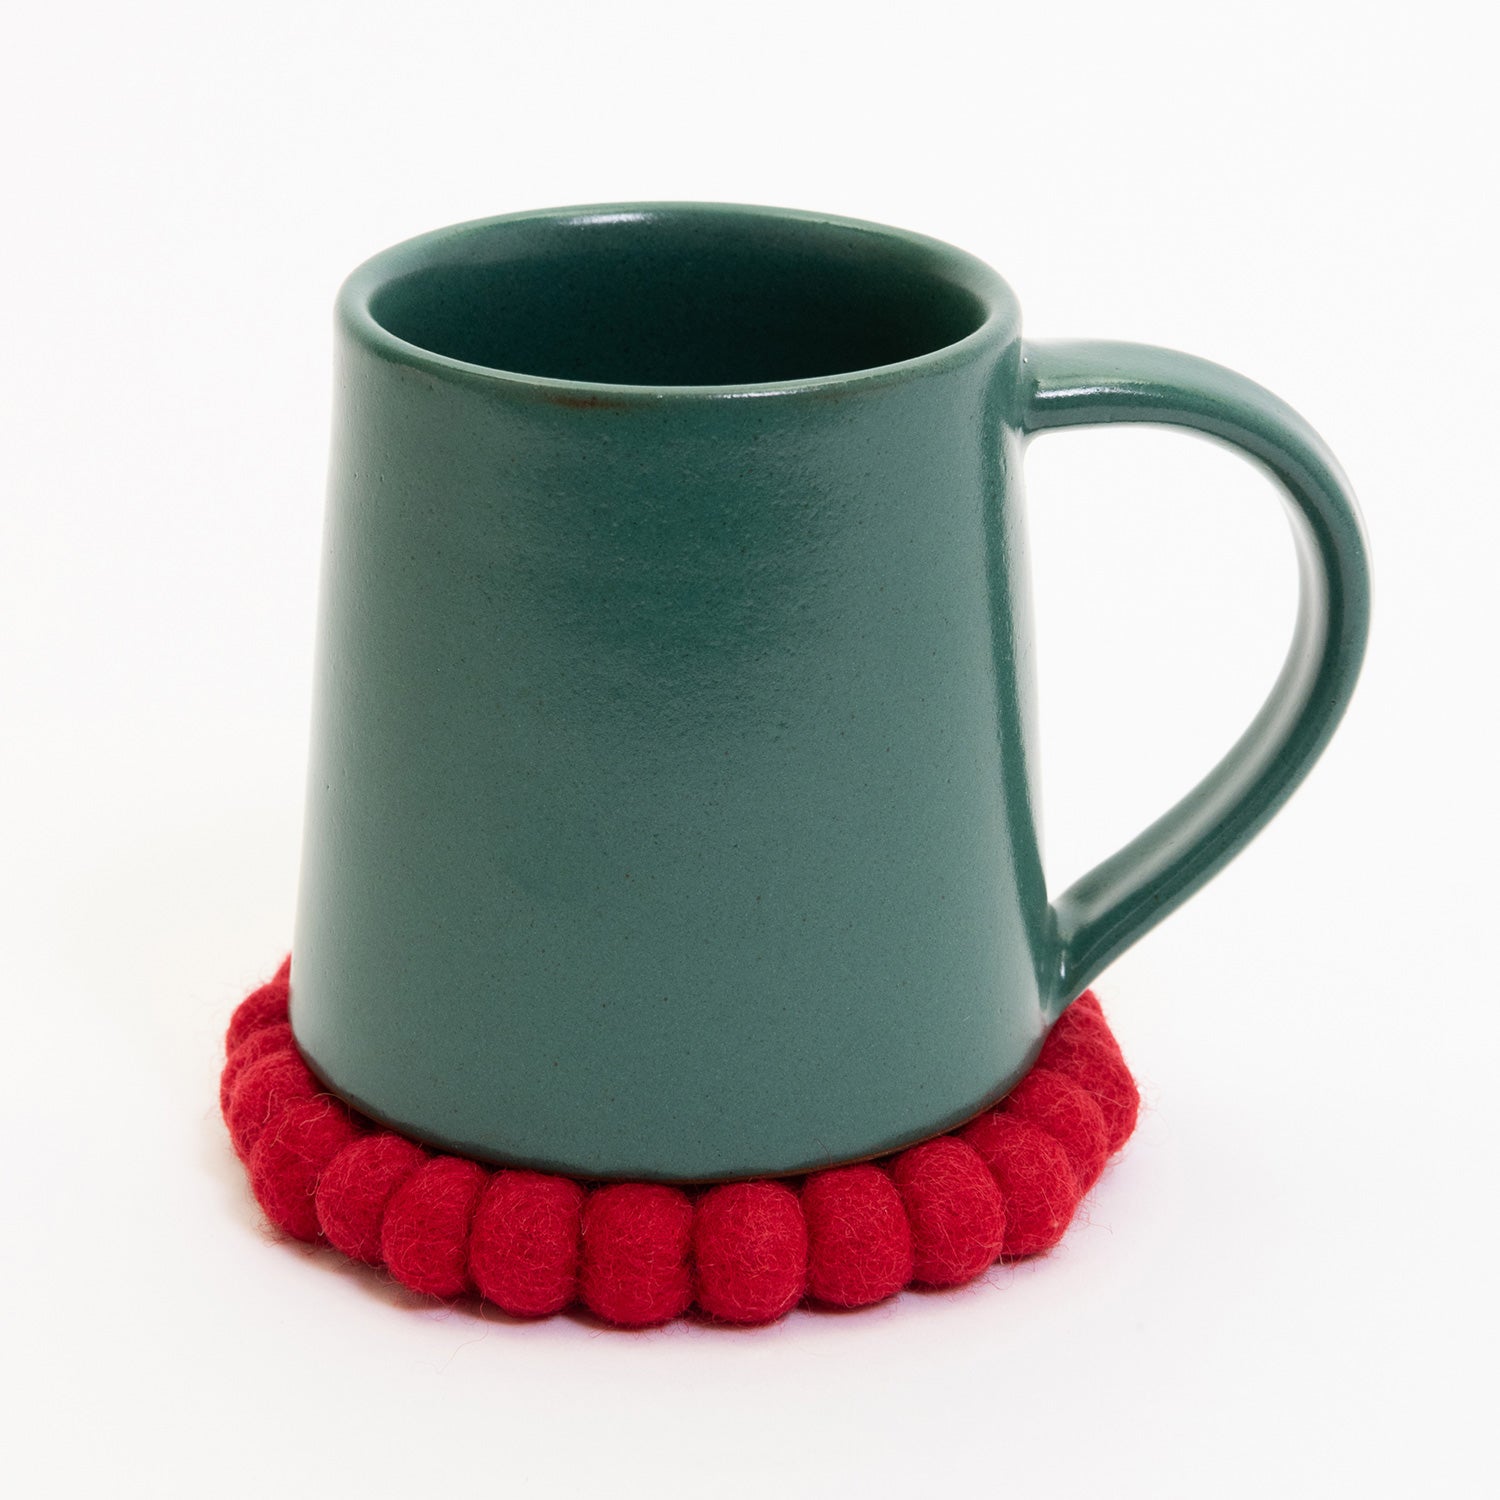 A teal coloured stoneware mug pictured on a white background. The mug is sitting on a red felt coaster.